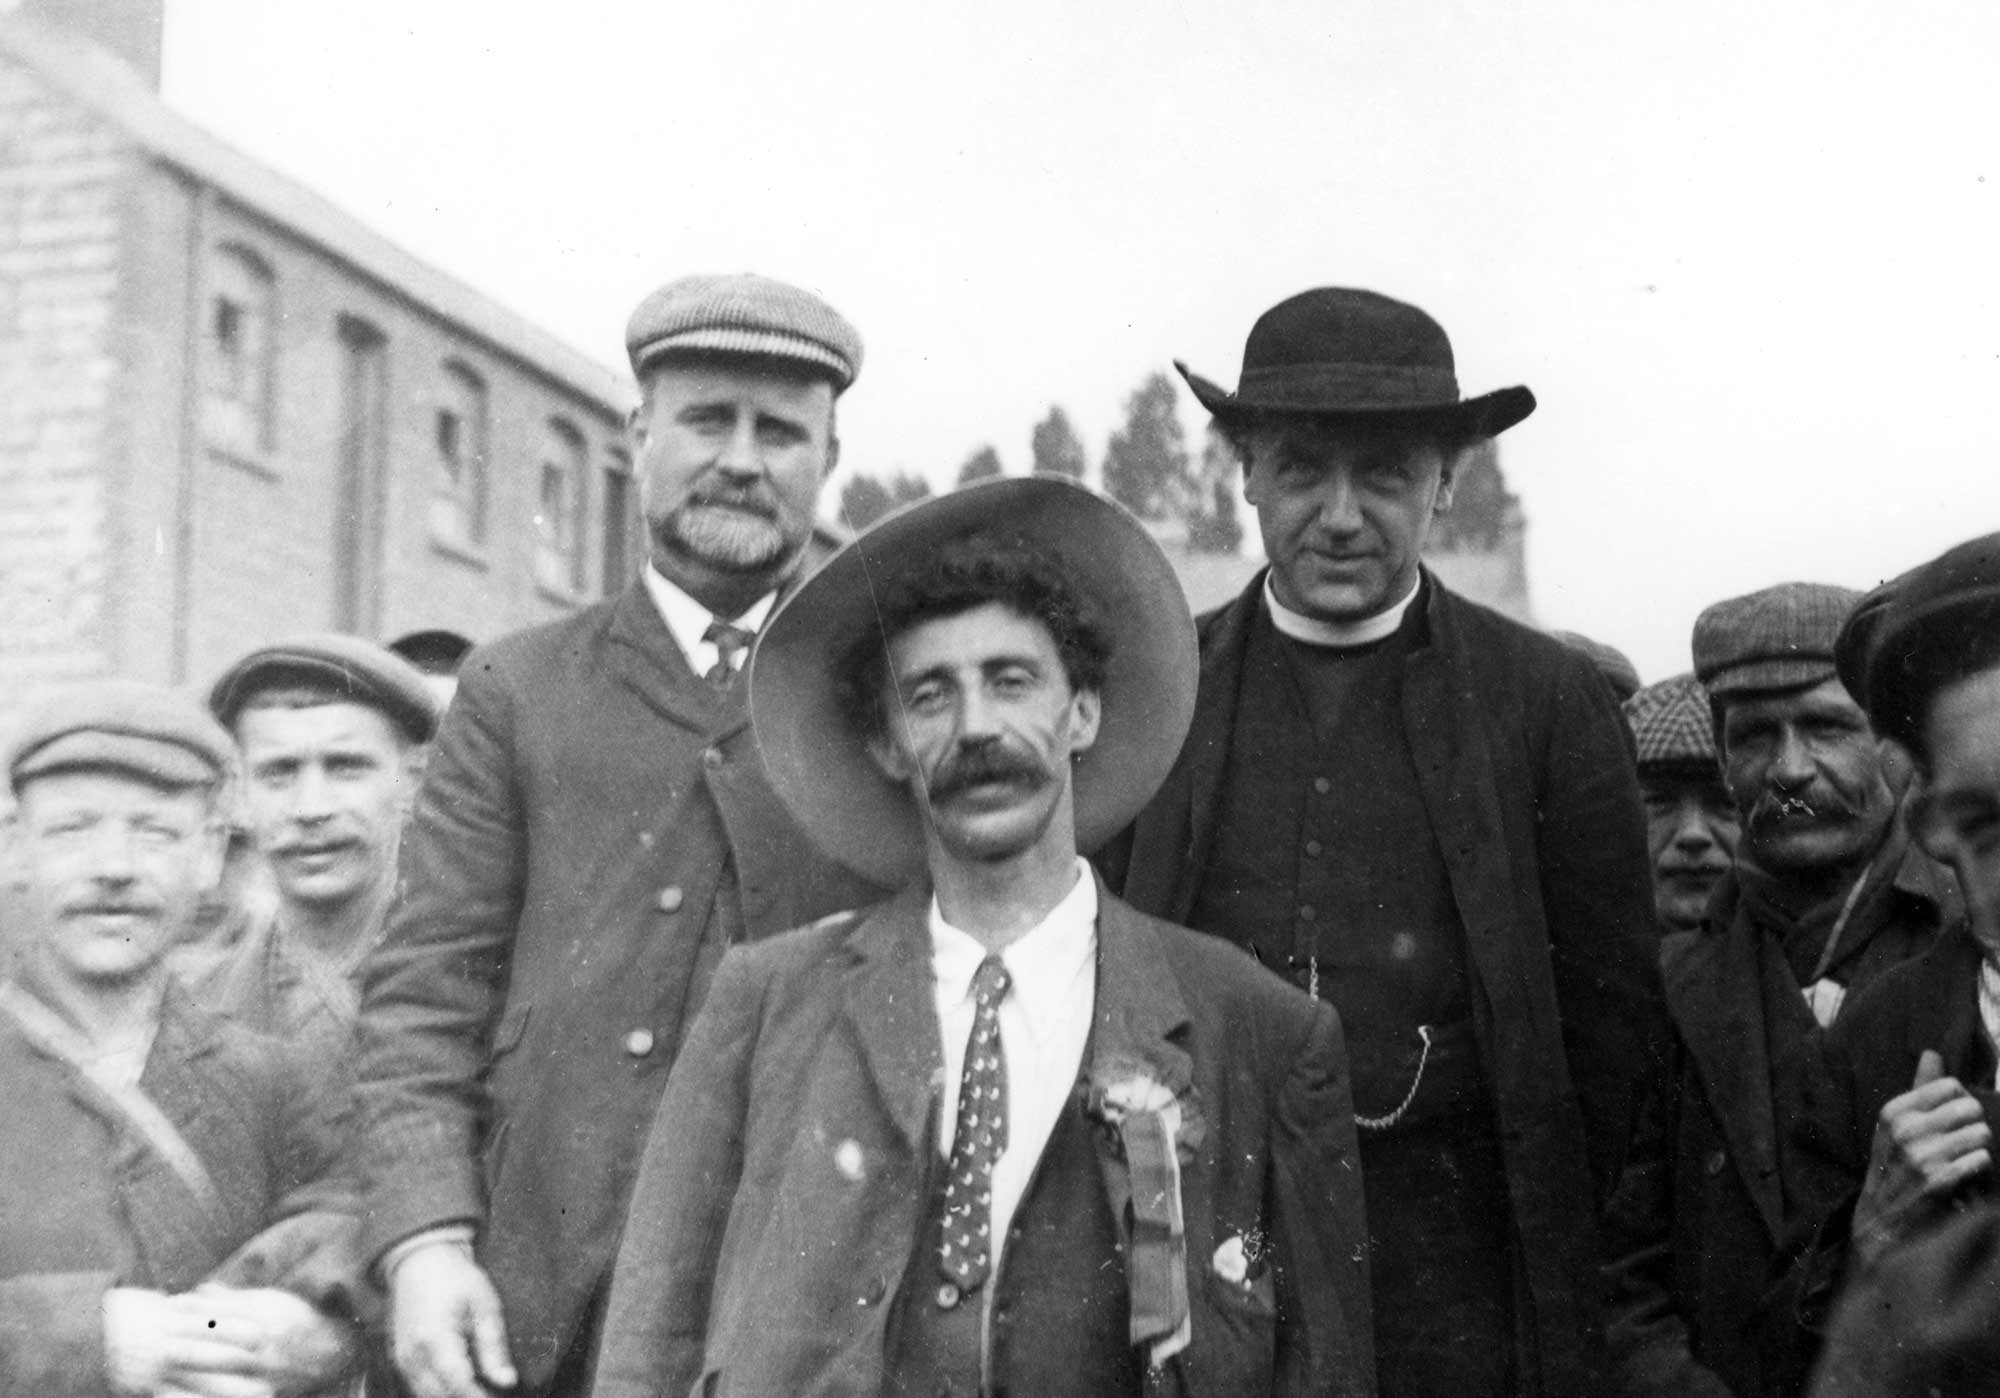 Rev. F.L. Donaldson (right centre) with the other leaders of the march of the unemployed, 1905 - Leicester and Leicestershire Record Office